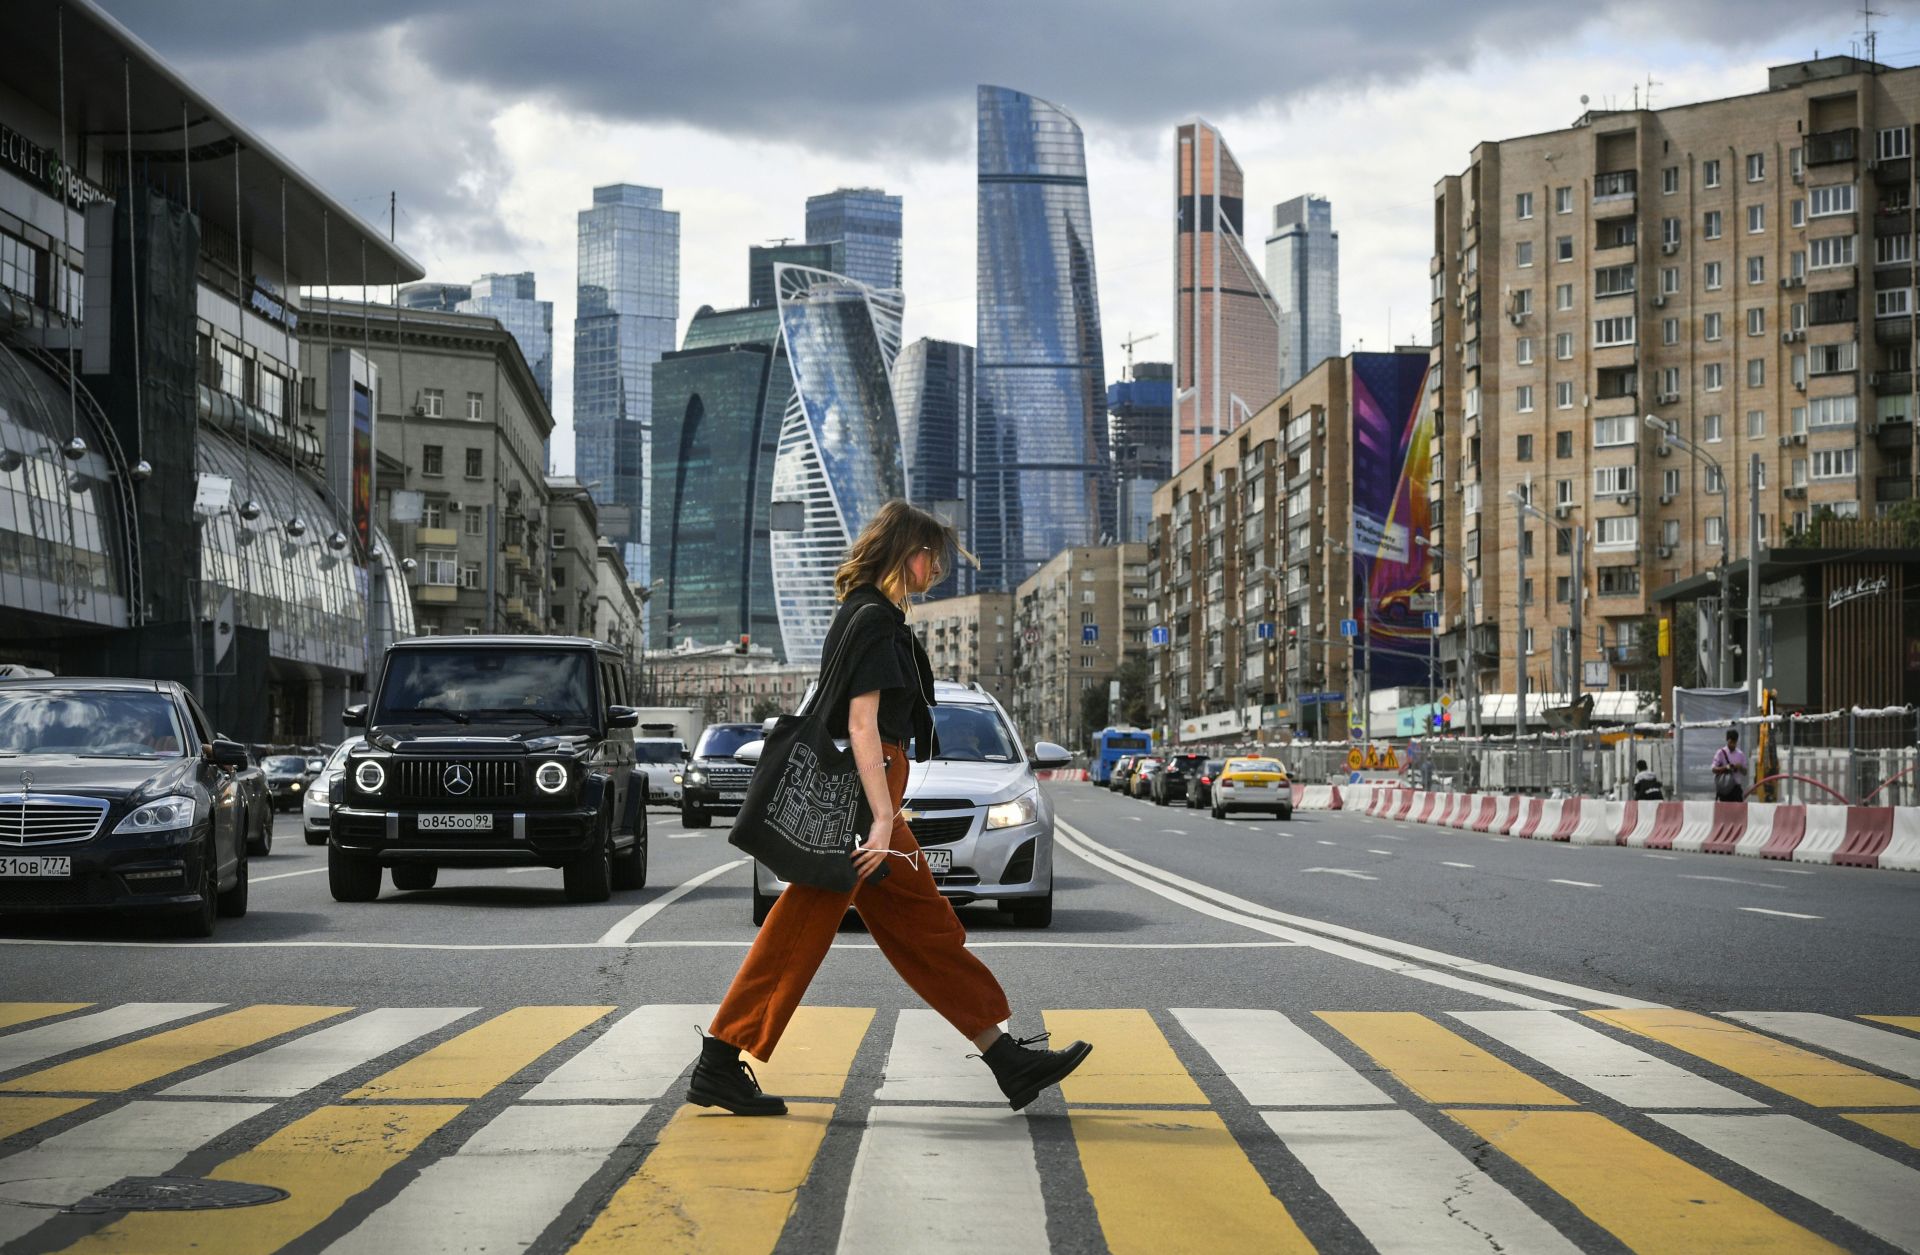 This photo shows a woman crossing a street near downtown Moscow, Russia.